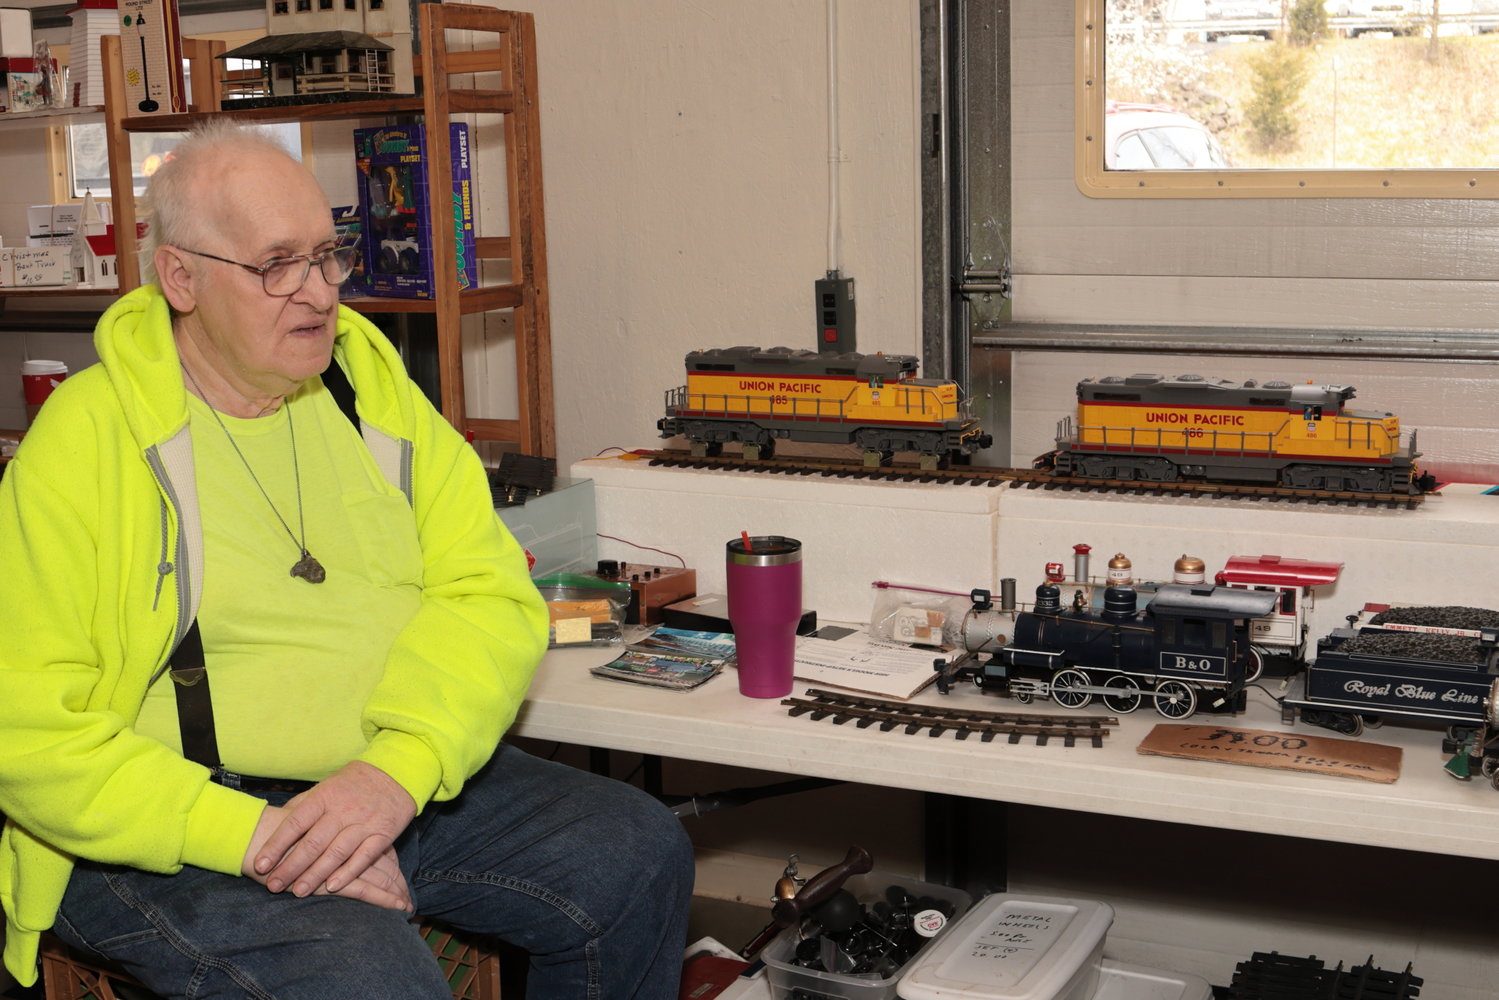 George Kemmerer came from Bethlehem, PA, to be a vendor. He was one of the only vendors to display the large-size G gauge trains and track. A device holds up the engine while maintaining the electrical contact with the track, so the engine's wheels can turn without any horizontal movement.